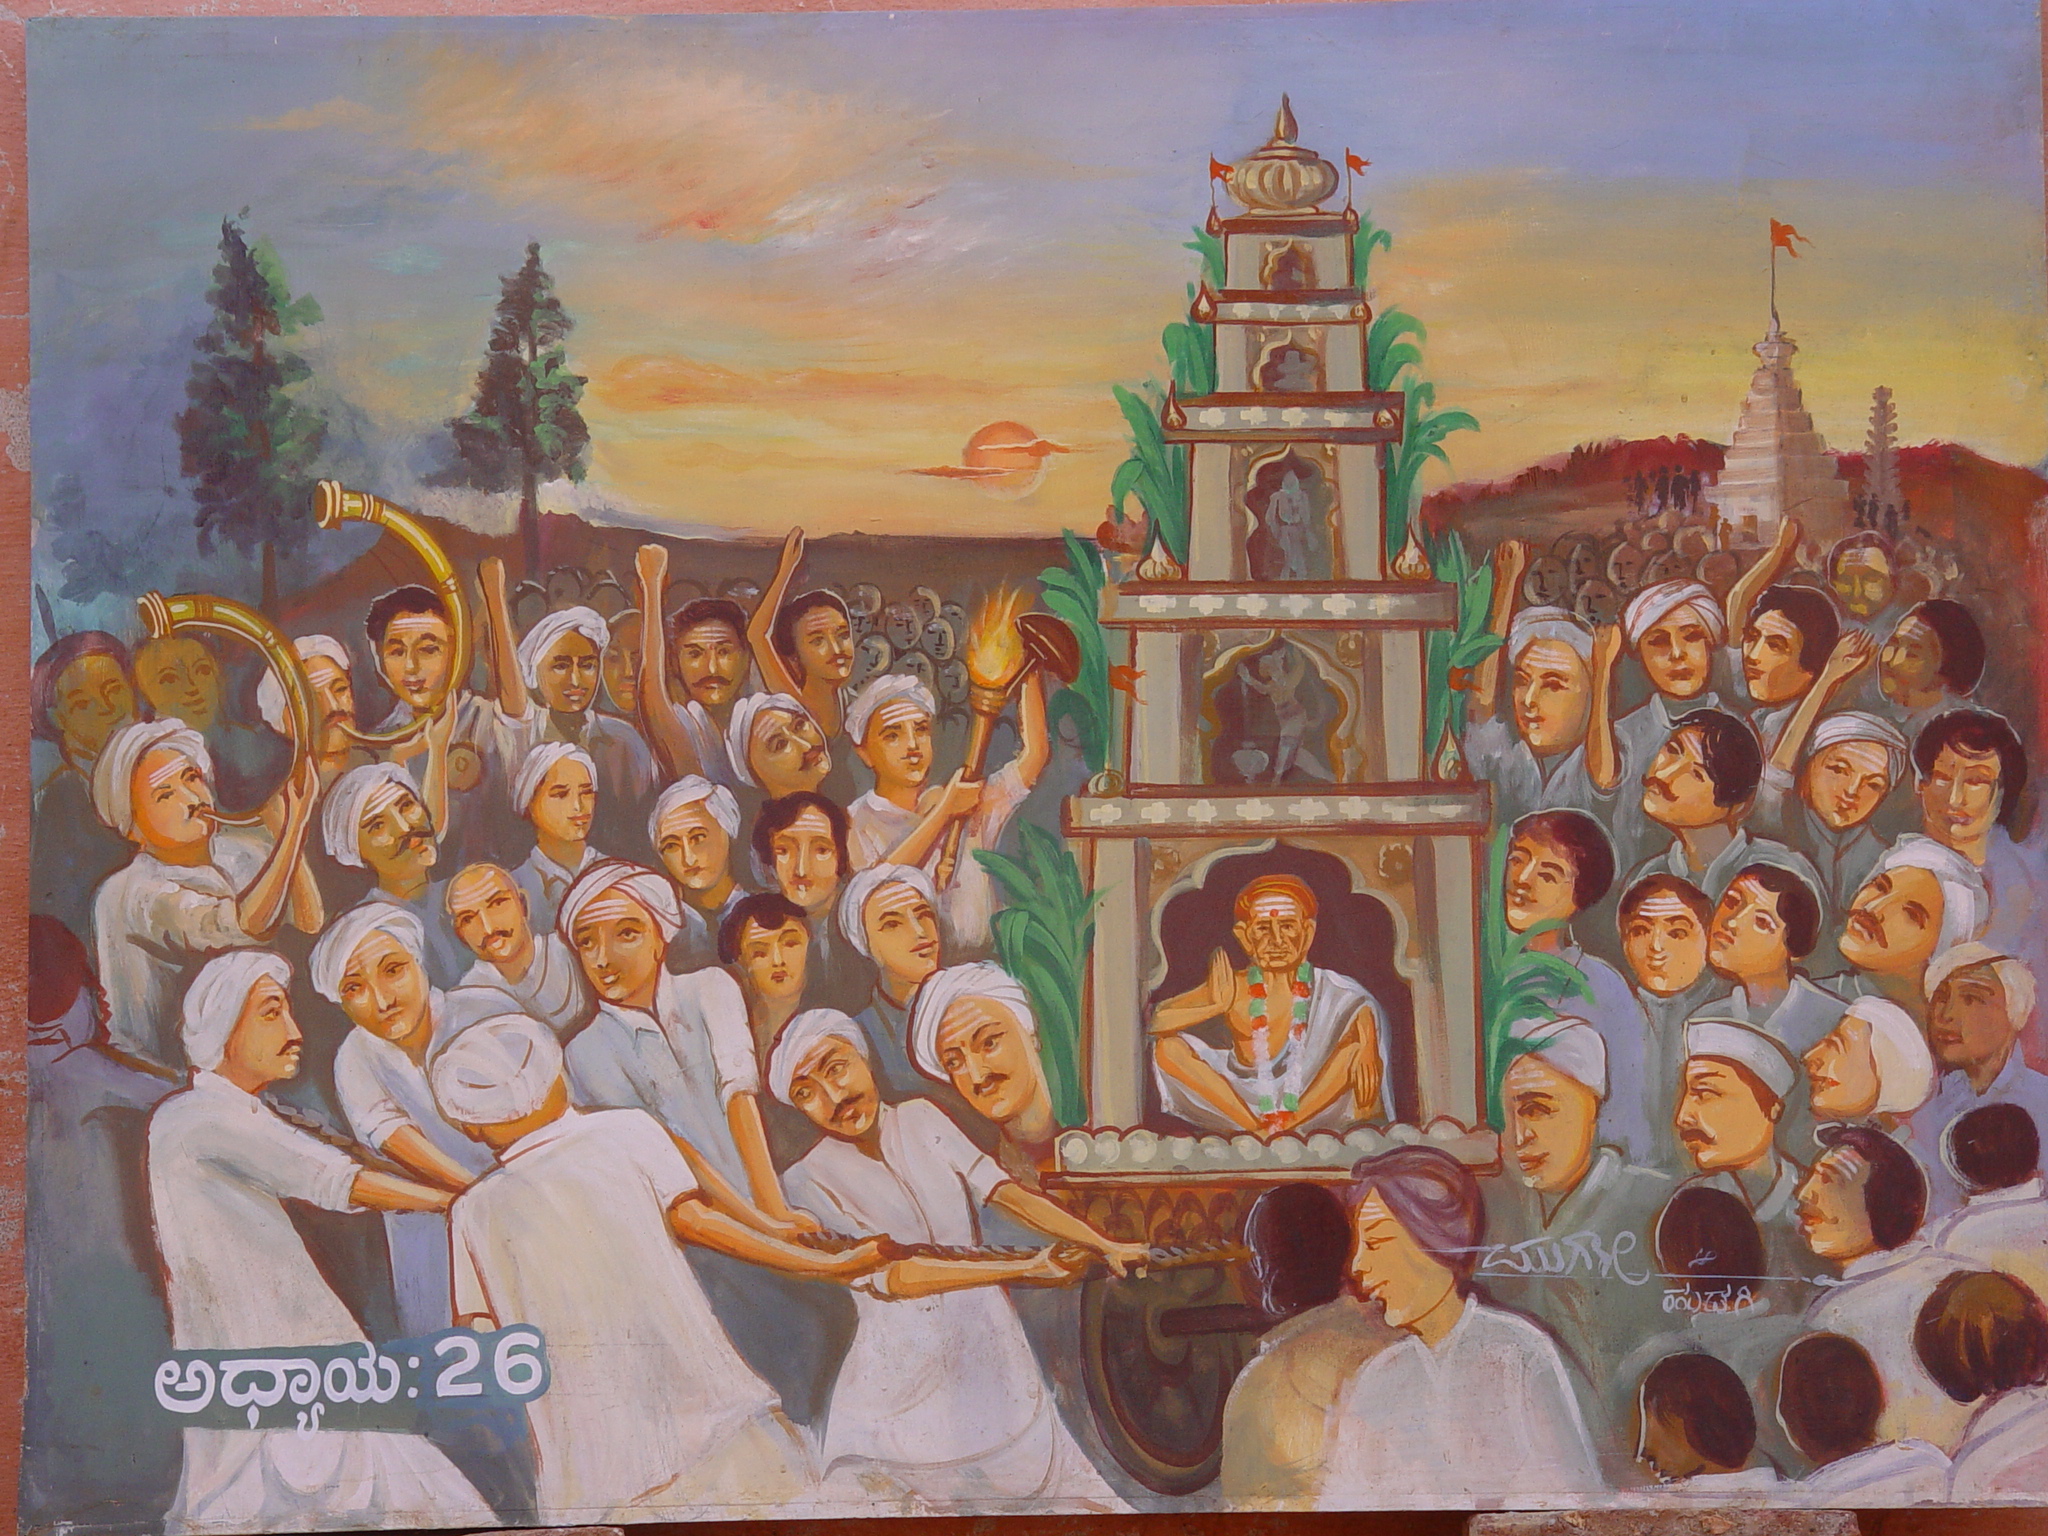 Victory, Victory to Siddha who firmly established in eternal peace